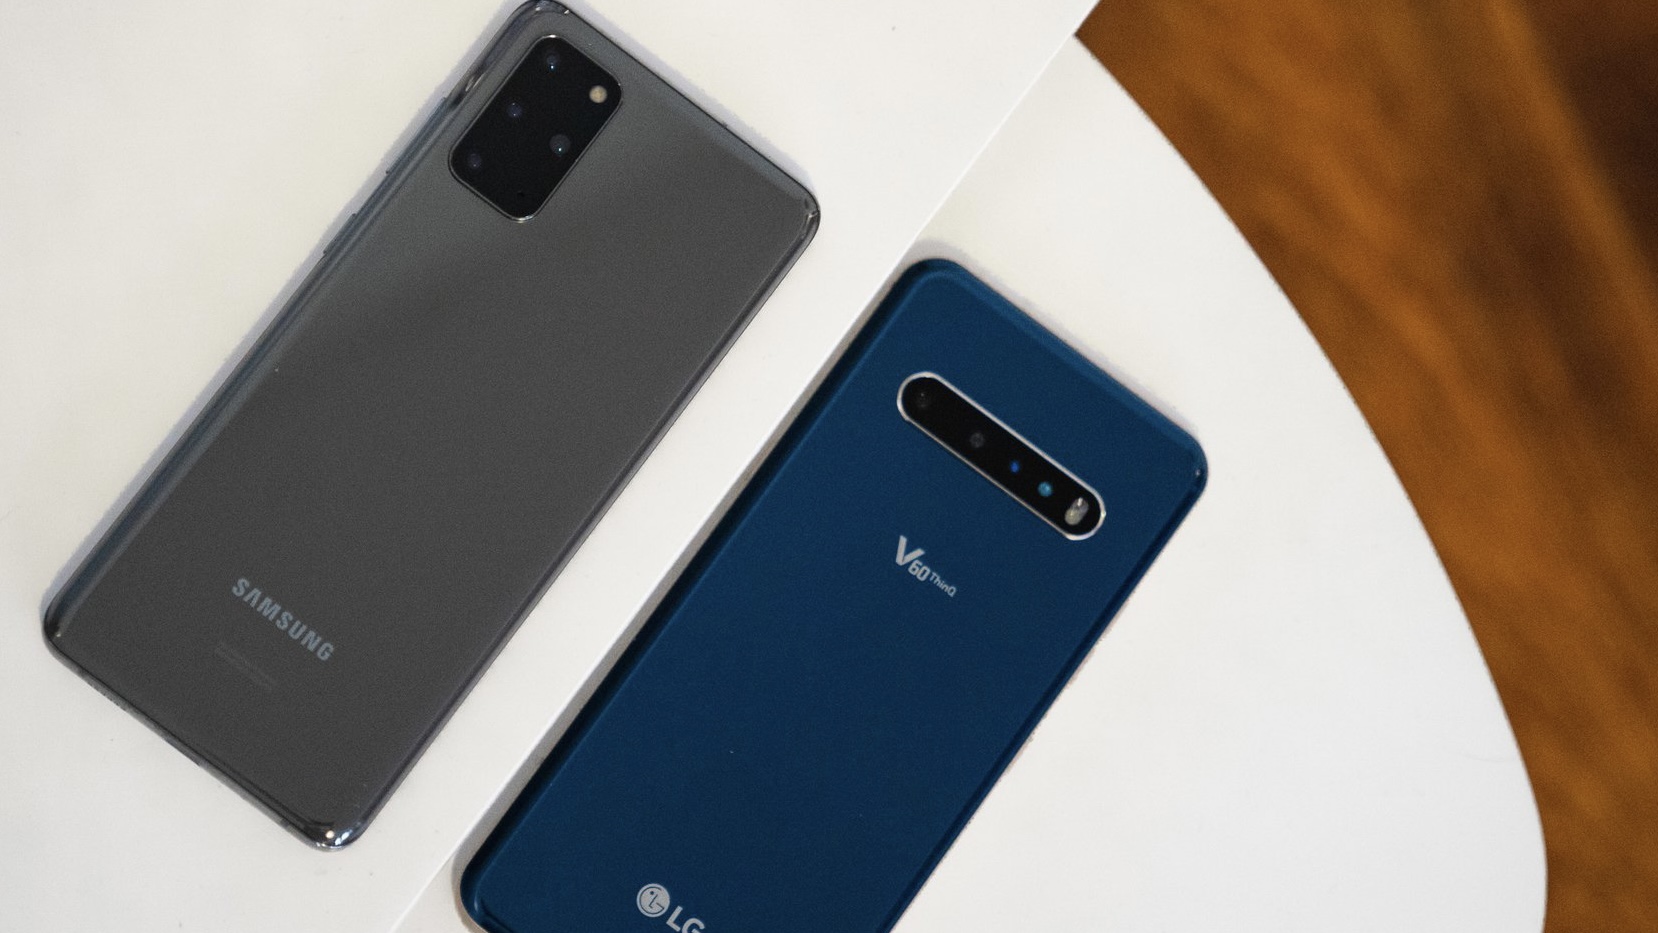 Samsung Galaxy S20+ and LG V60 together